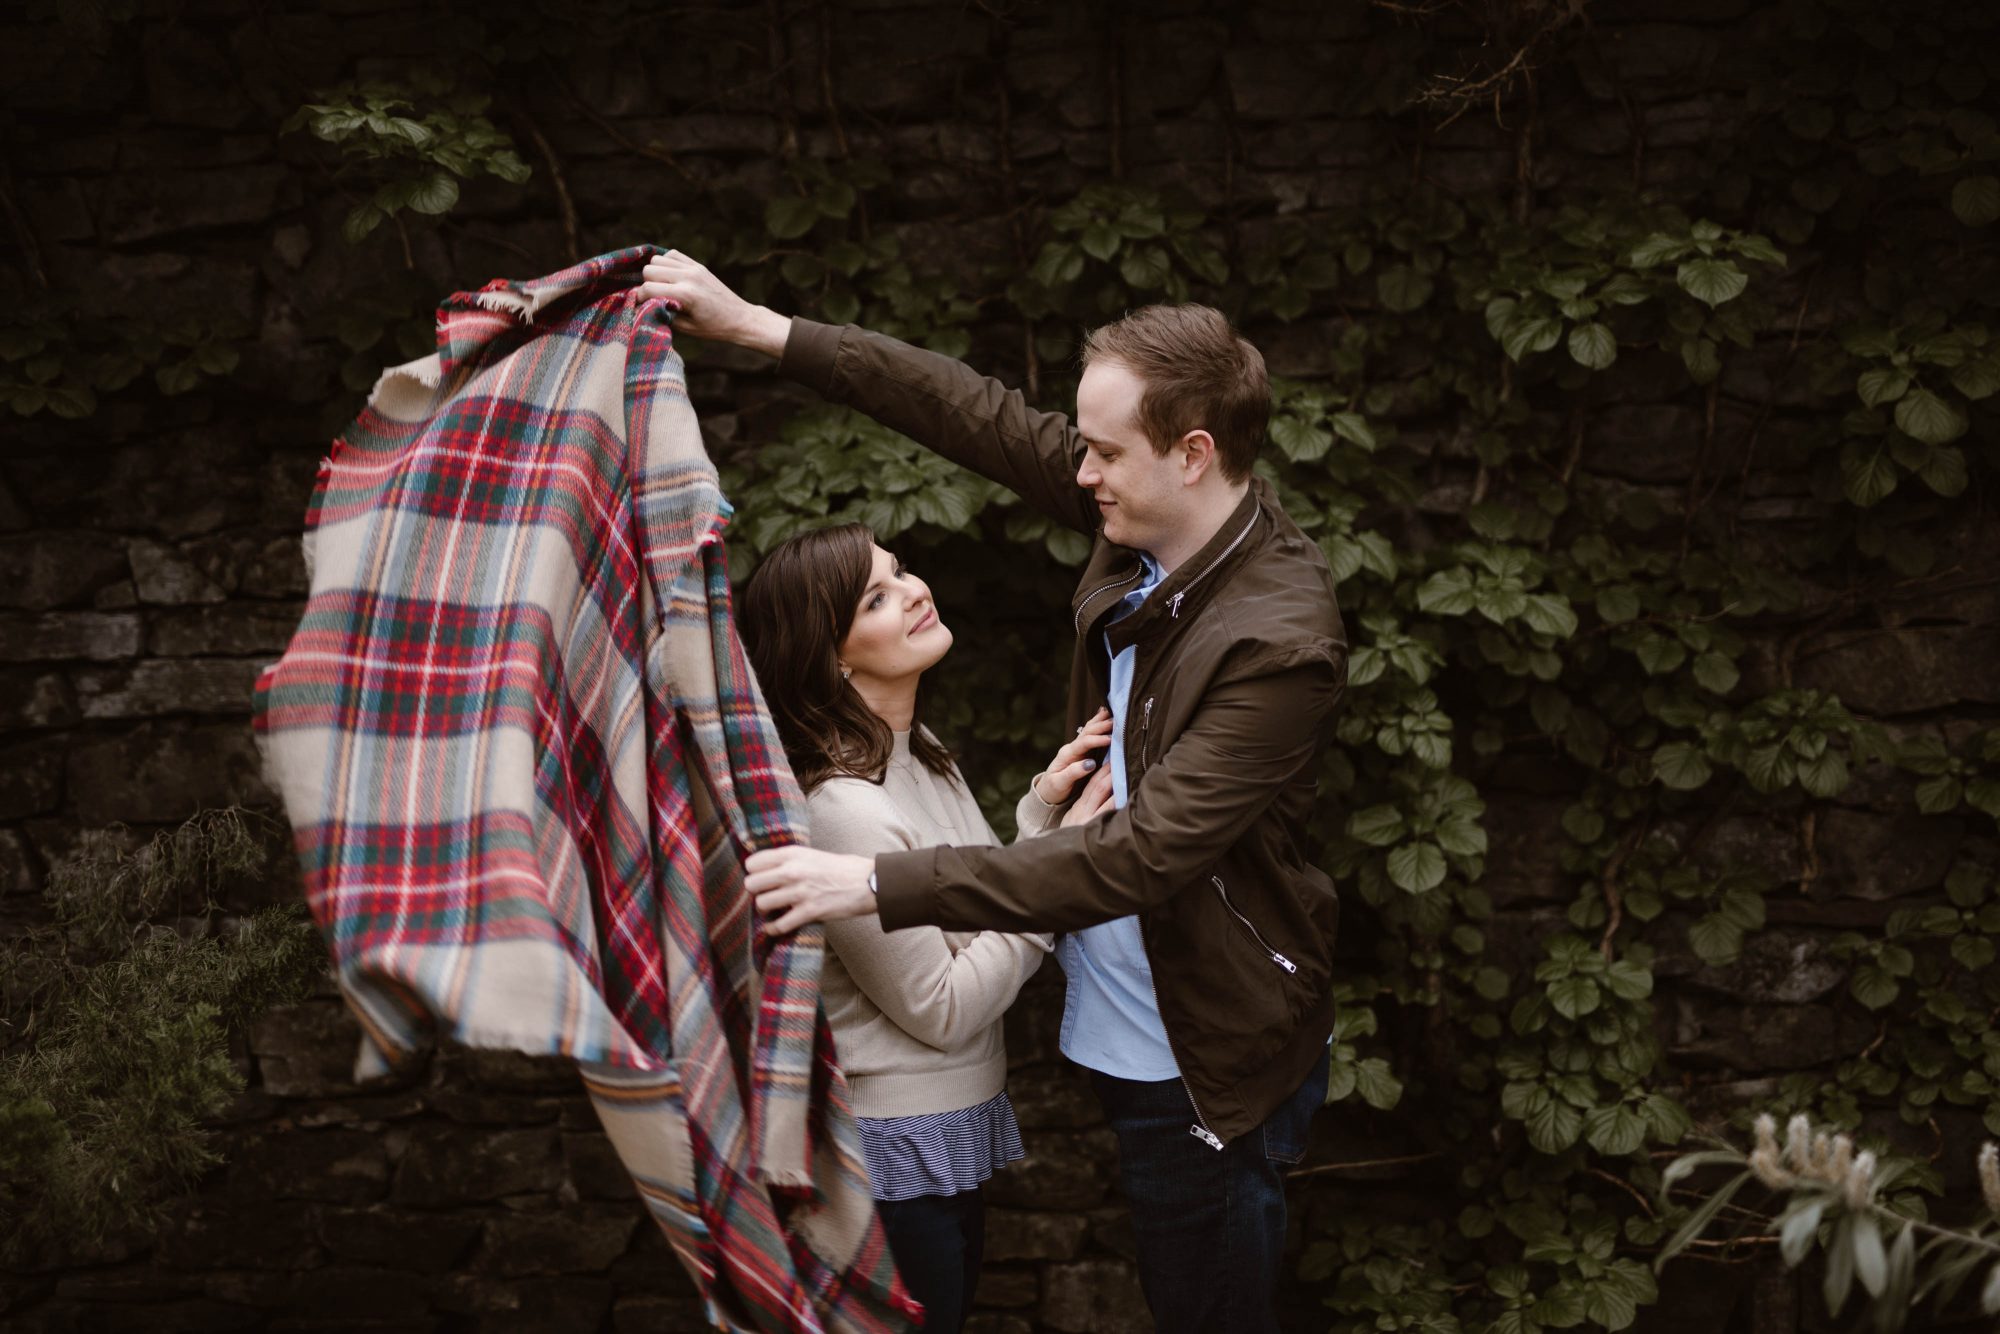 Knoxville Engagement Photos at the Knoxville Botanical Gardens